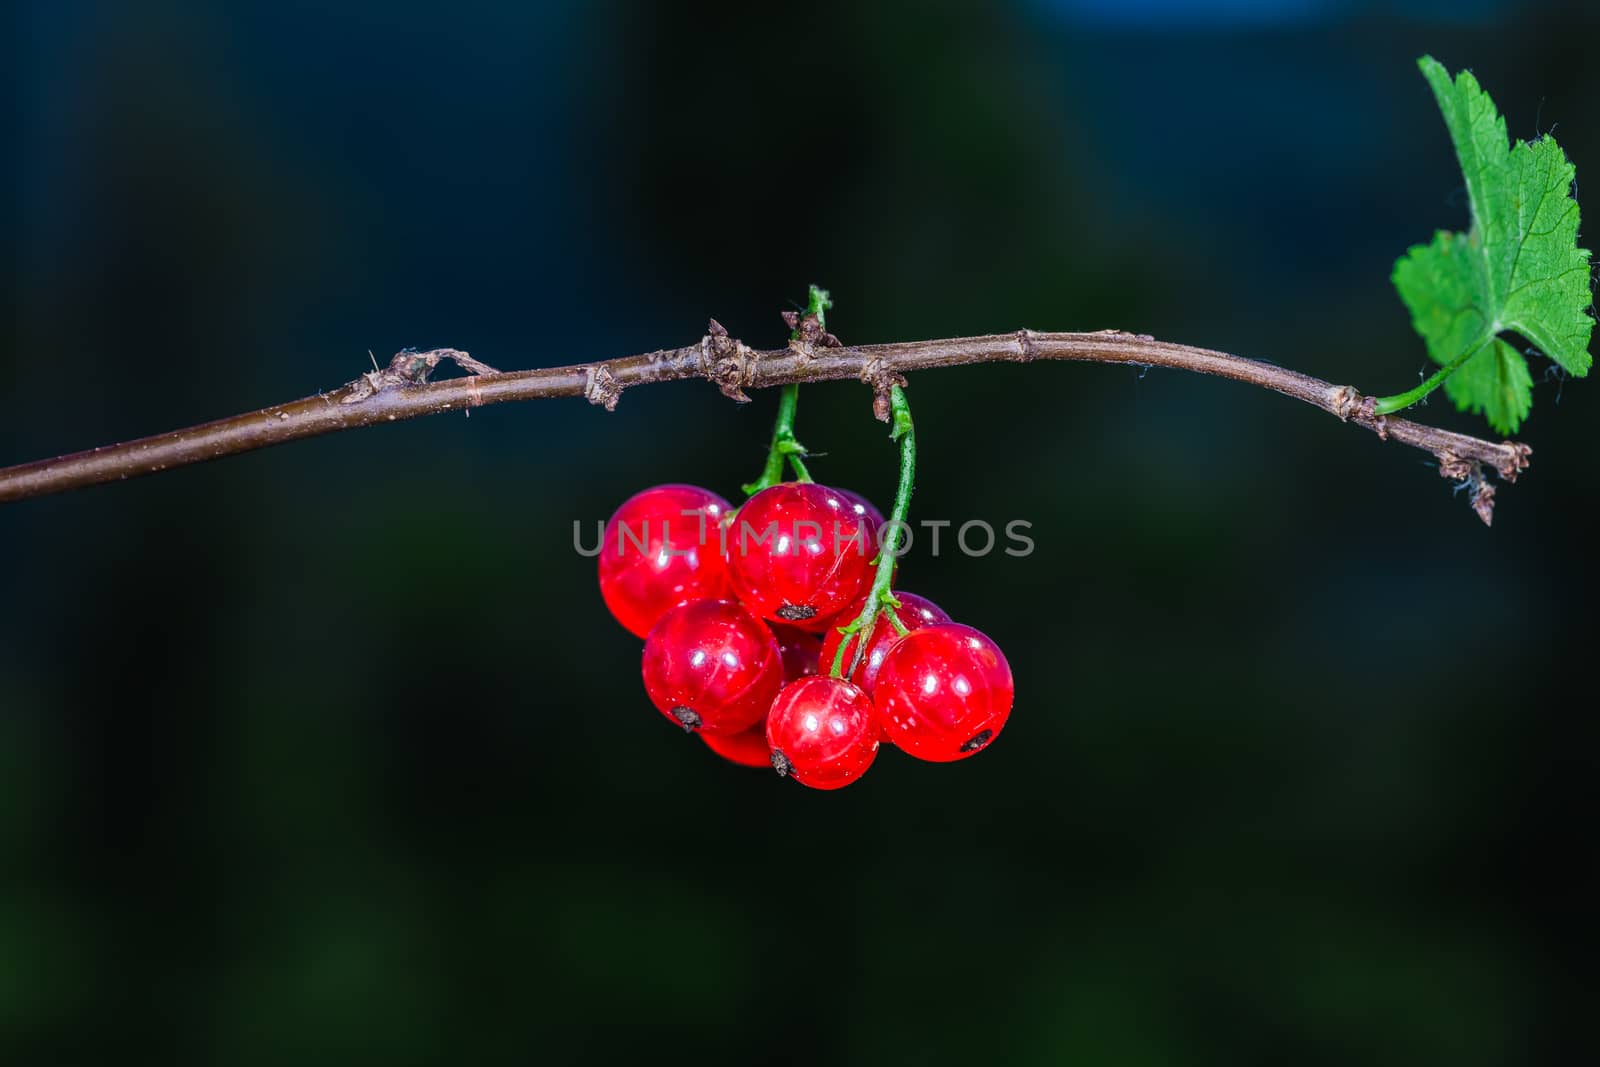 Amazing little juicy red currants in the wild nature of Ontario, Canada.